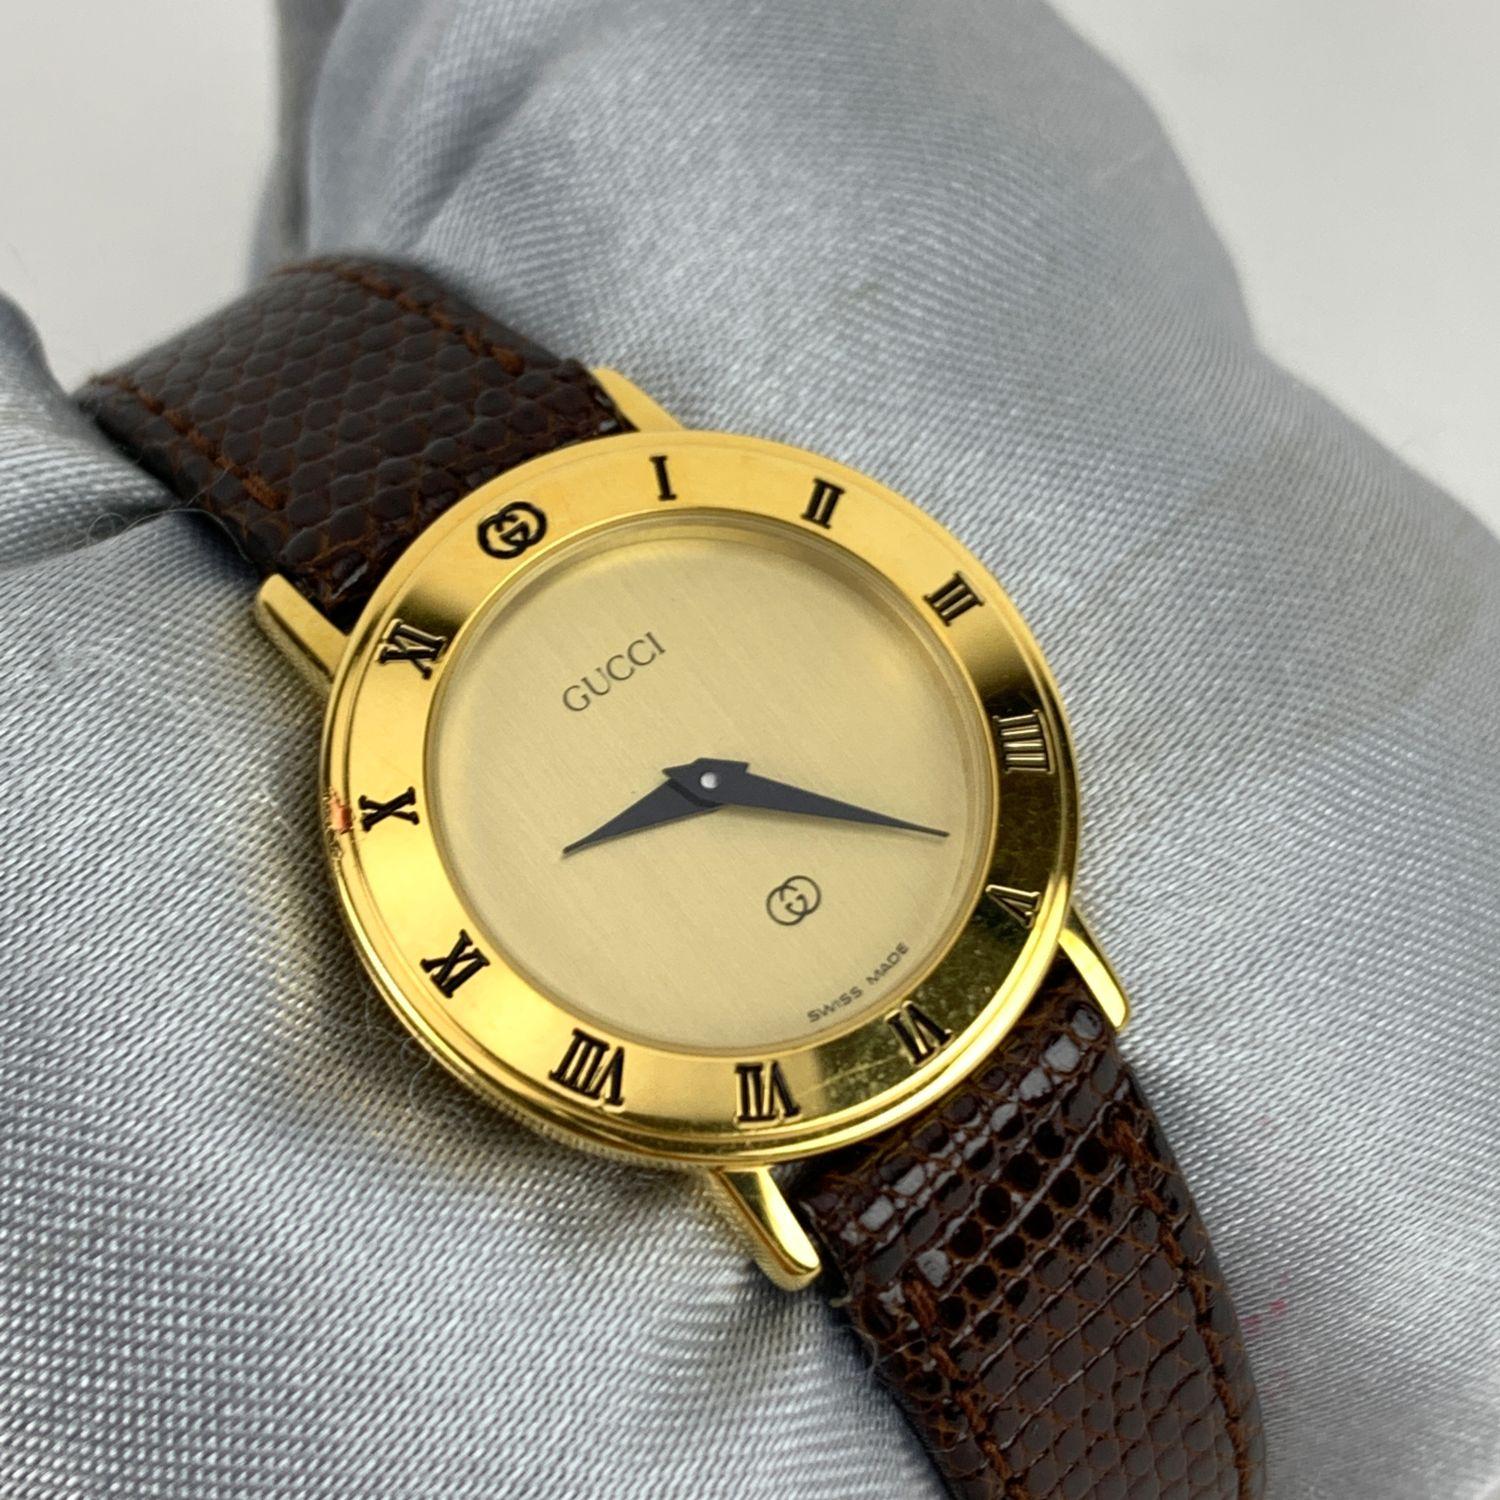 Beautiful vintage wristwatch by GUCCI. Round gold metal stainless steel case. Beige dial. Swiss Made Quartz Movement. Brown leather wrist strap with 7 holes adjustment. GG - GUCCI buckle. Roman numbers engraved on the bezel. 'GUCCI' lettering on the